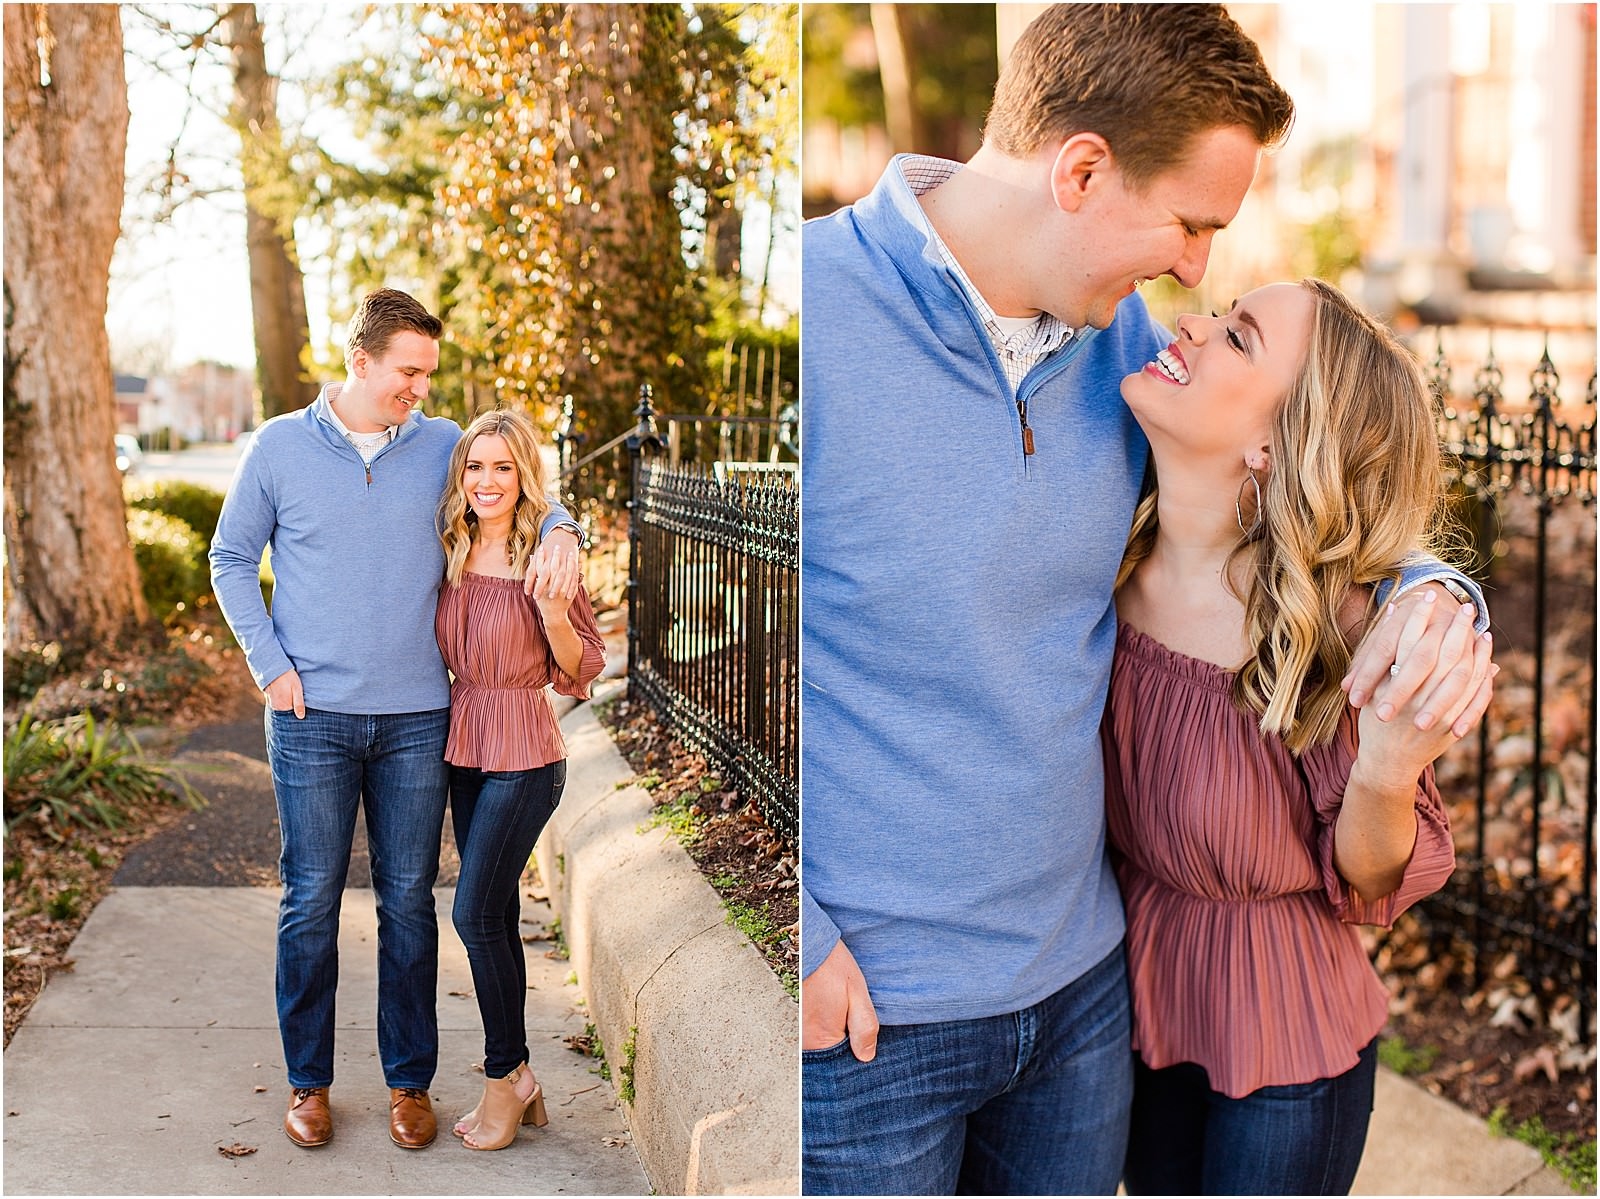 Madison and Christaan | A 20 West Engagement Session in Downto wn Newburgh | Bret and Brandie Photography026.jpg